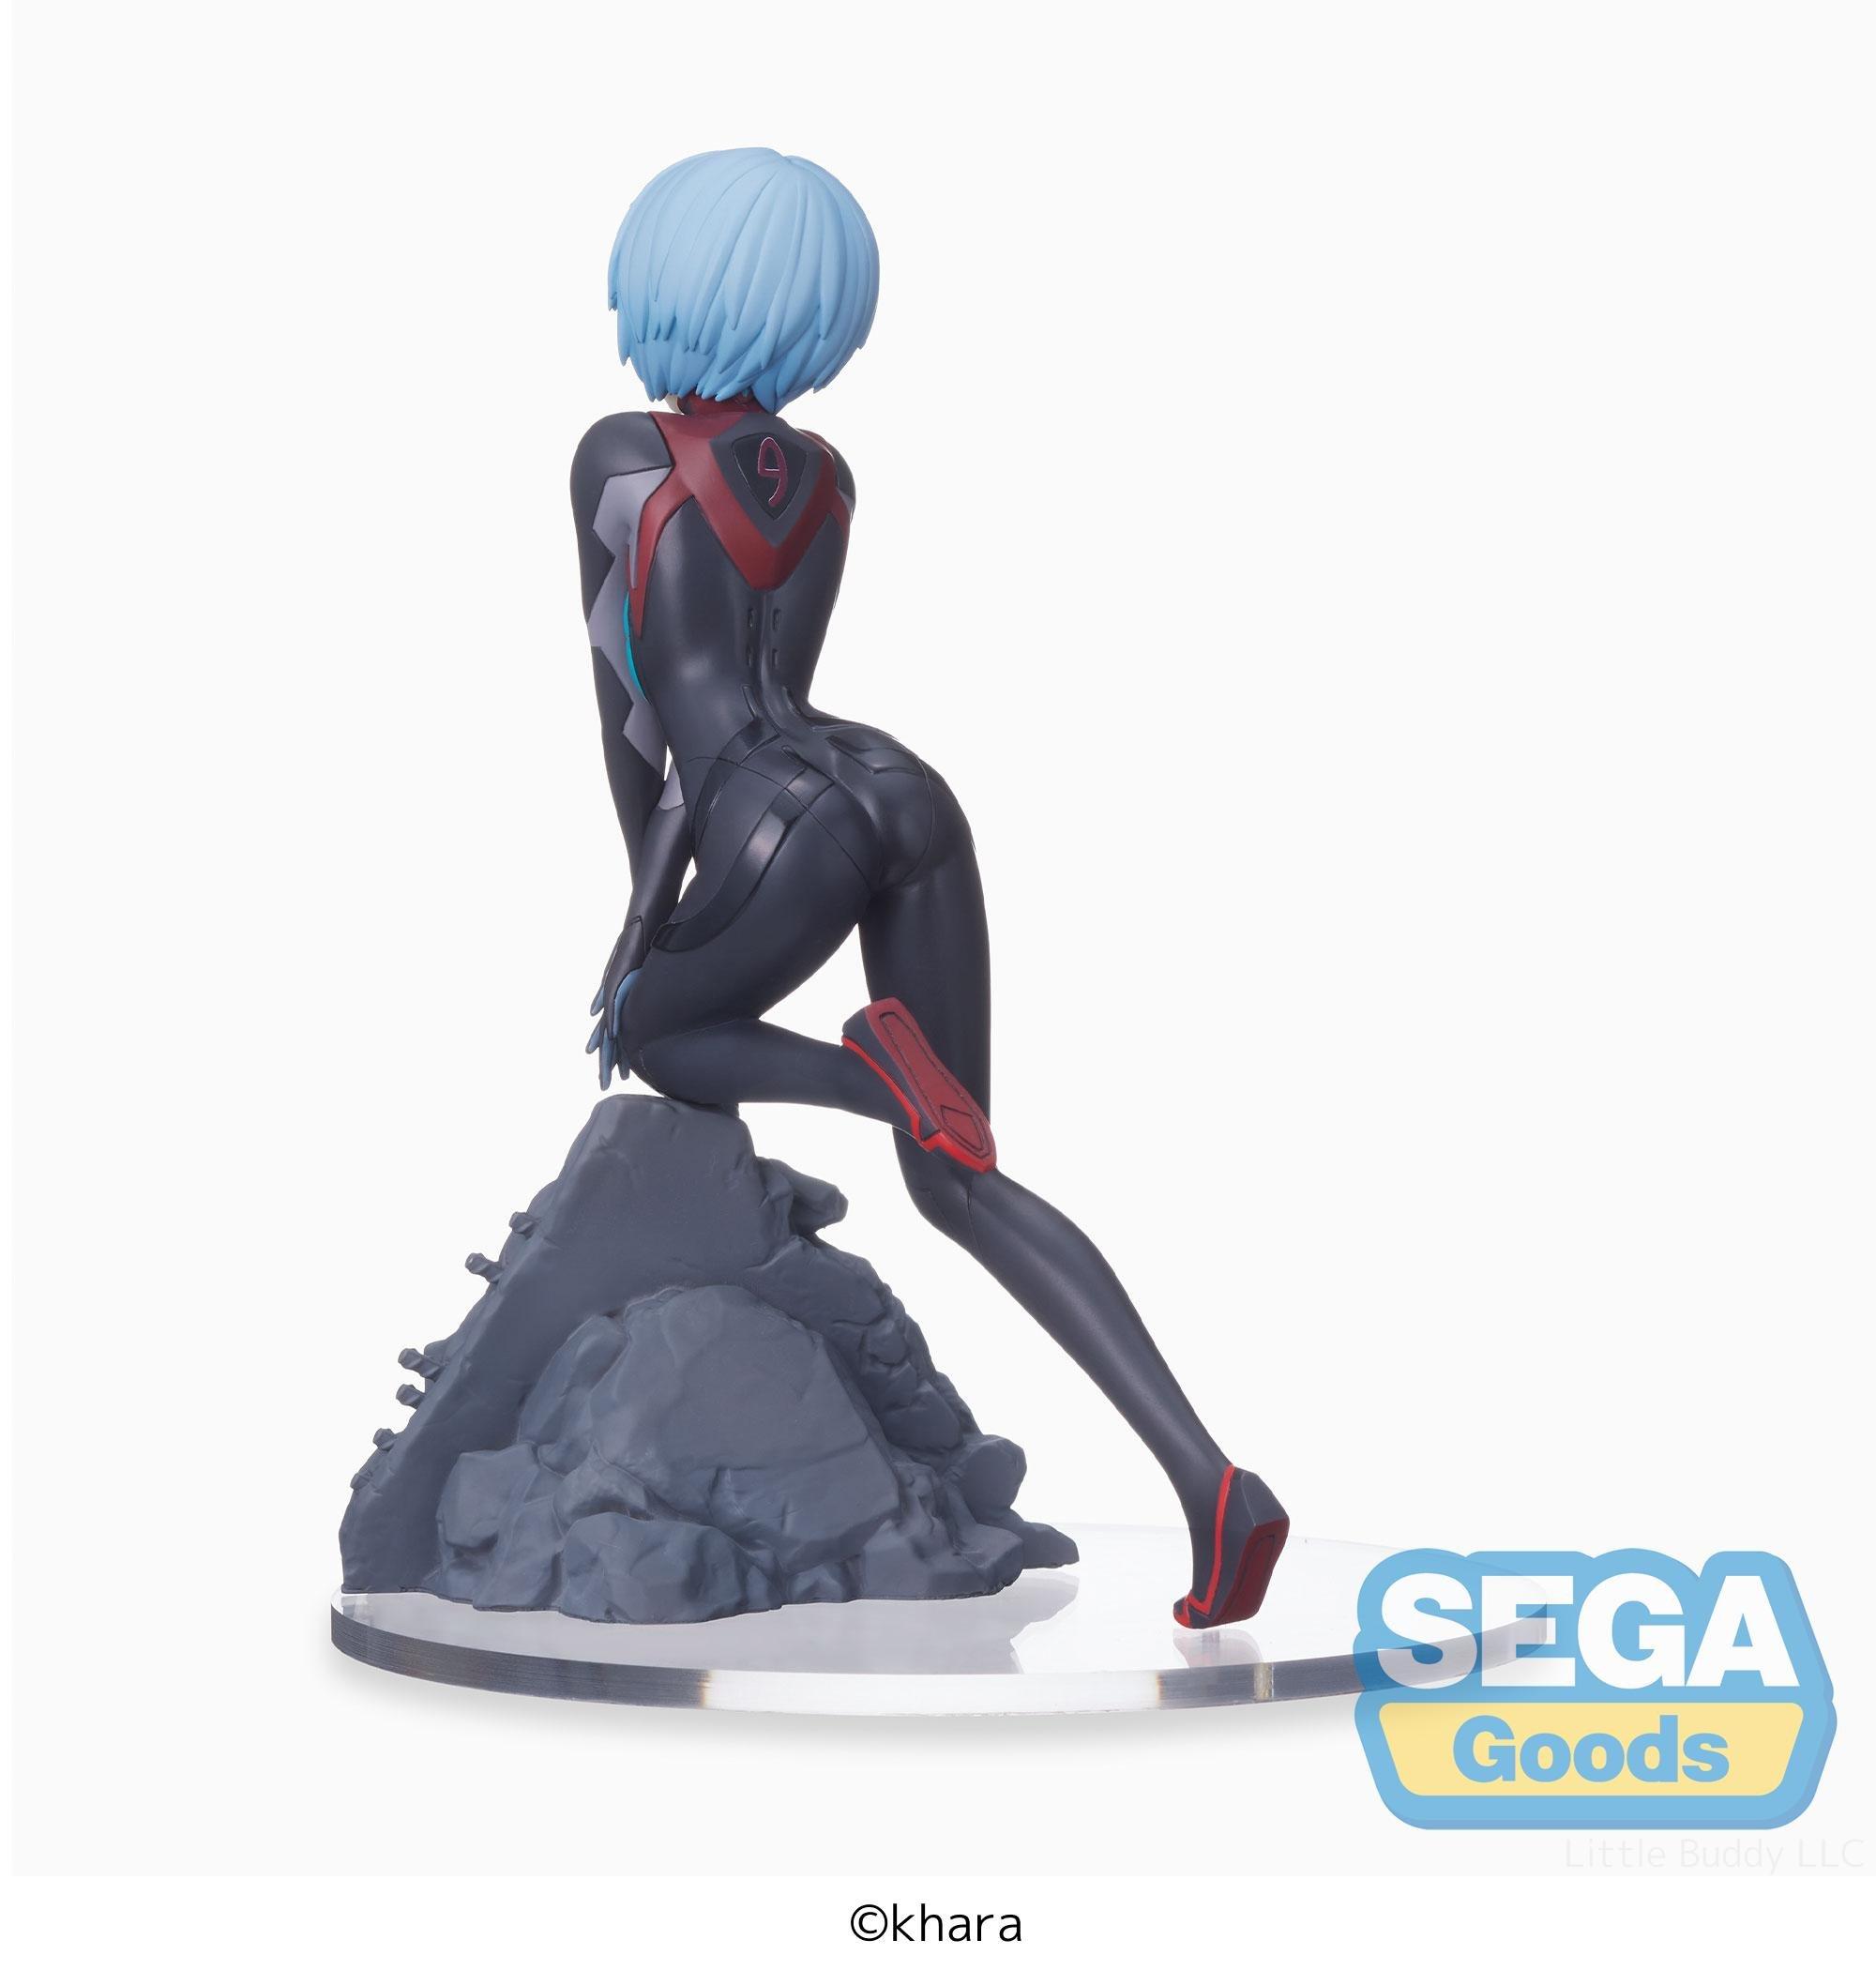 SEGA Goods Evangelion: 3.0 Thrice Upon a Time Rei Ayanami 7.5-In Statue